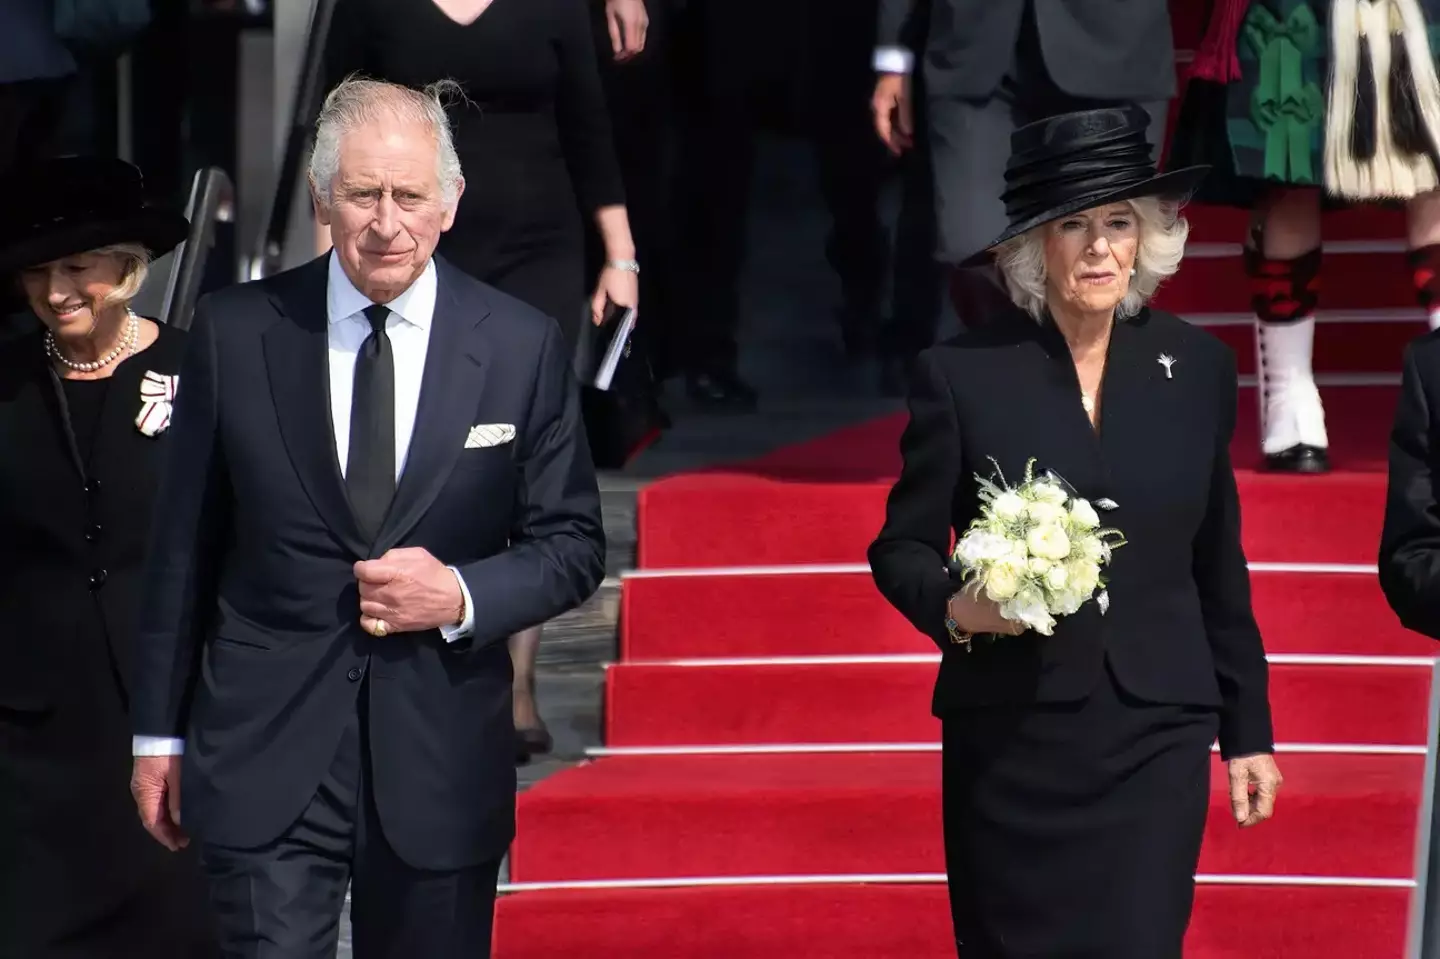 King Charles III's coronation is set for later this year.